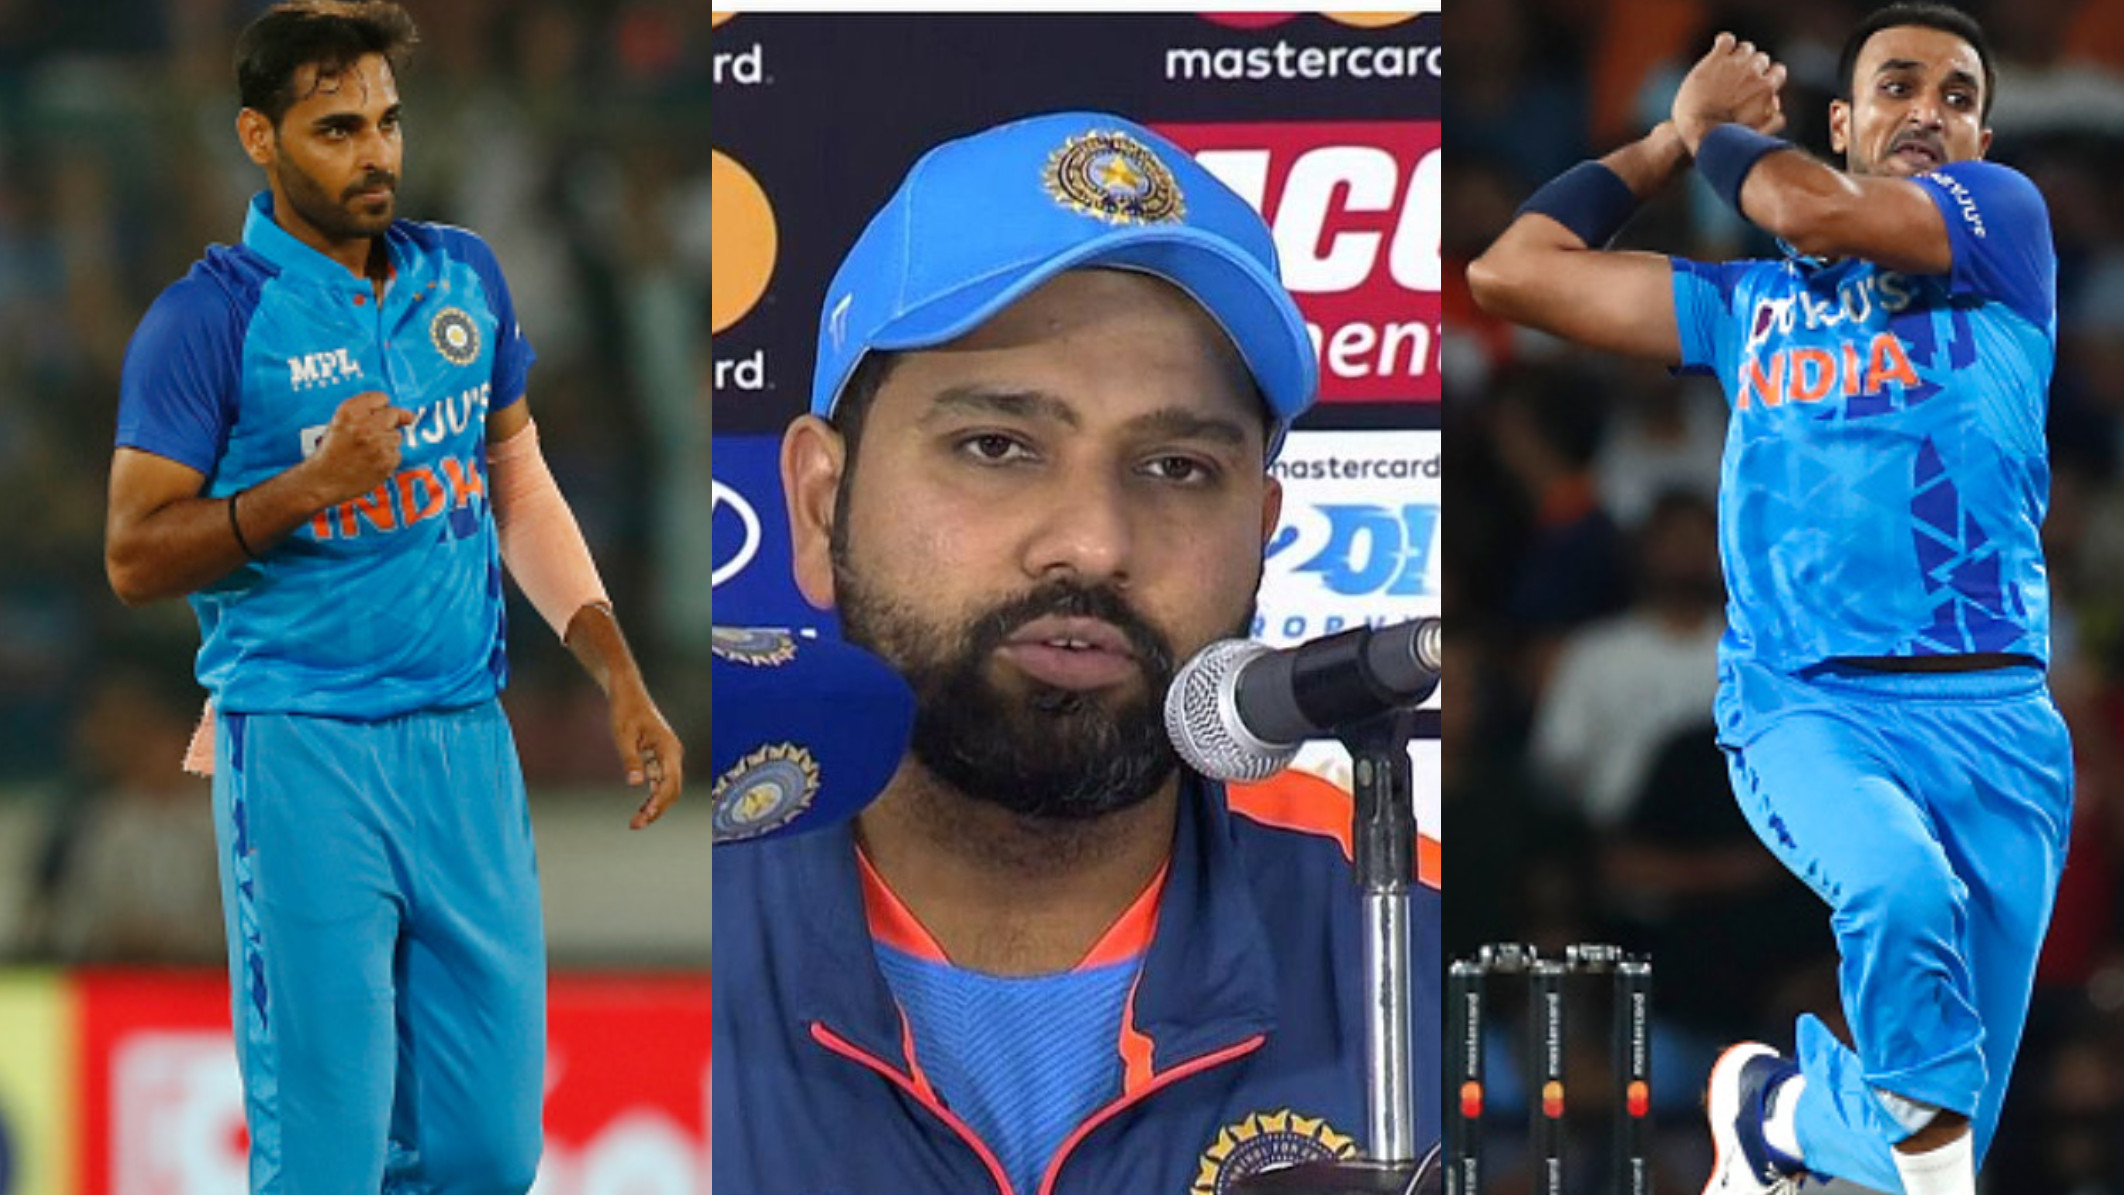 IND v AUS 2022: 'Time for us to show faith in them'- Rohit Sharma on Bhuvneshwar Kumar and Harshal Patel